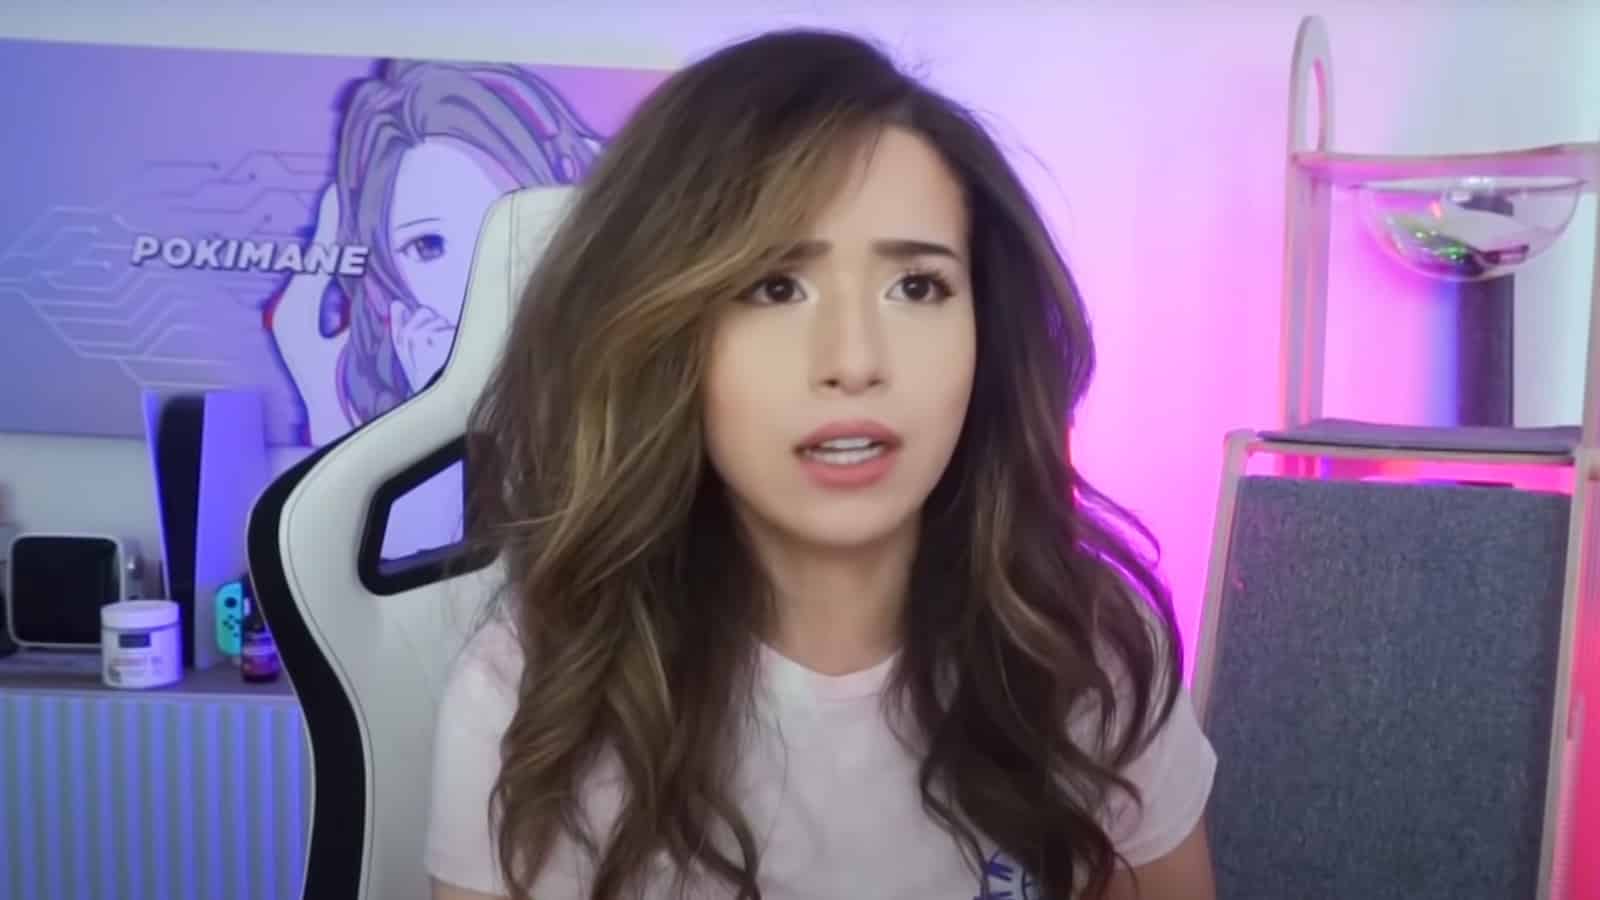 Pokimane explains why her "fear of falling off" might lead to more Twitch breaks